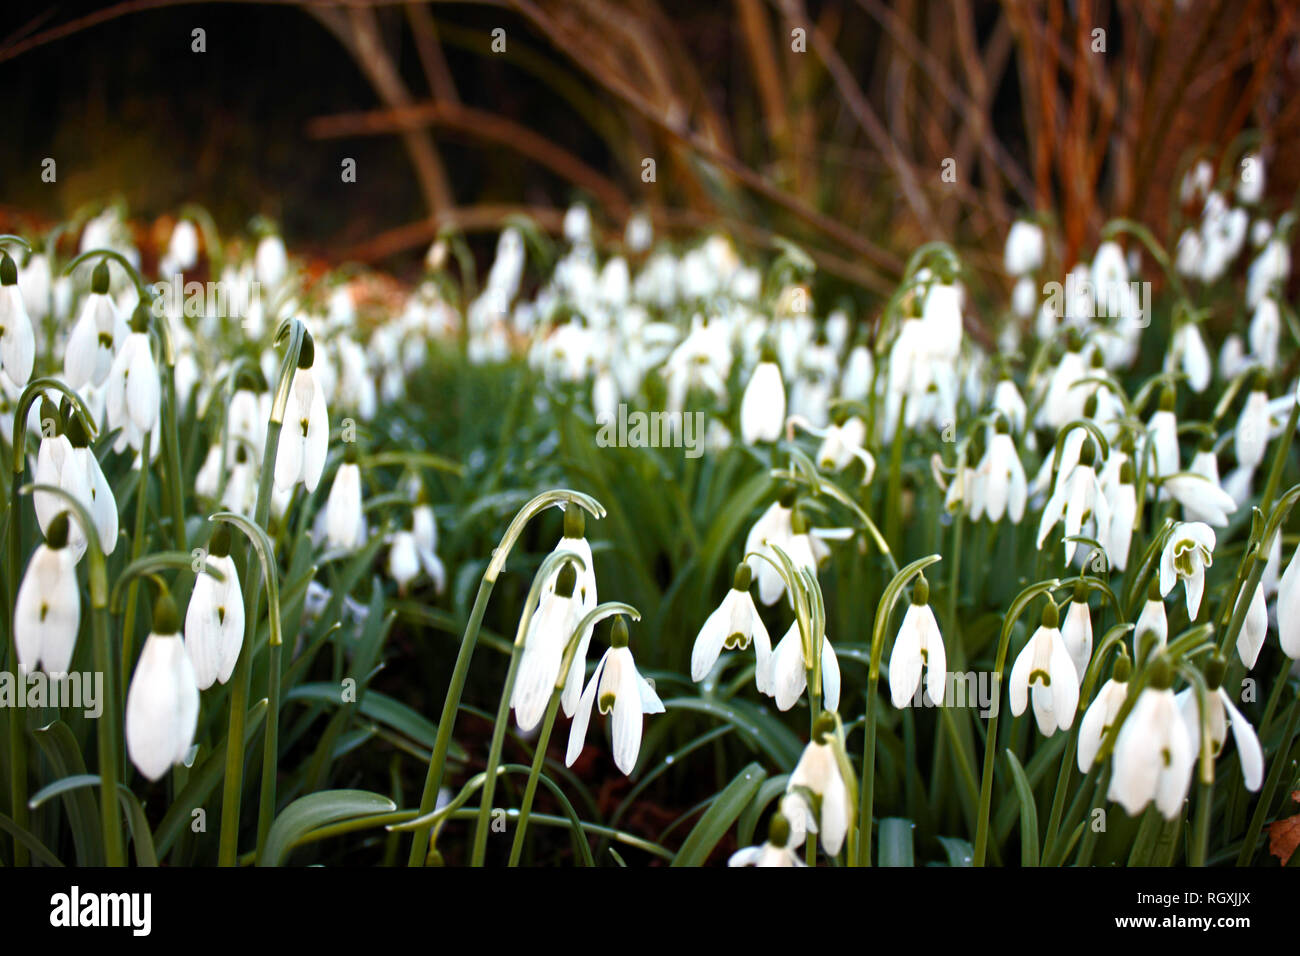 Patch of snowdrops (Galanthus nivalis) selectively focused on foreground. Photography was taken in January in South England. Harbinger of spring. Stock Photo